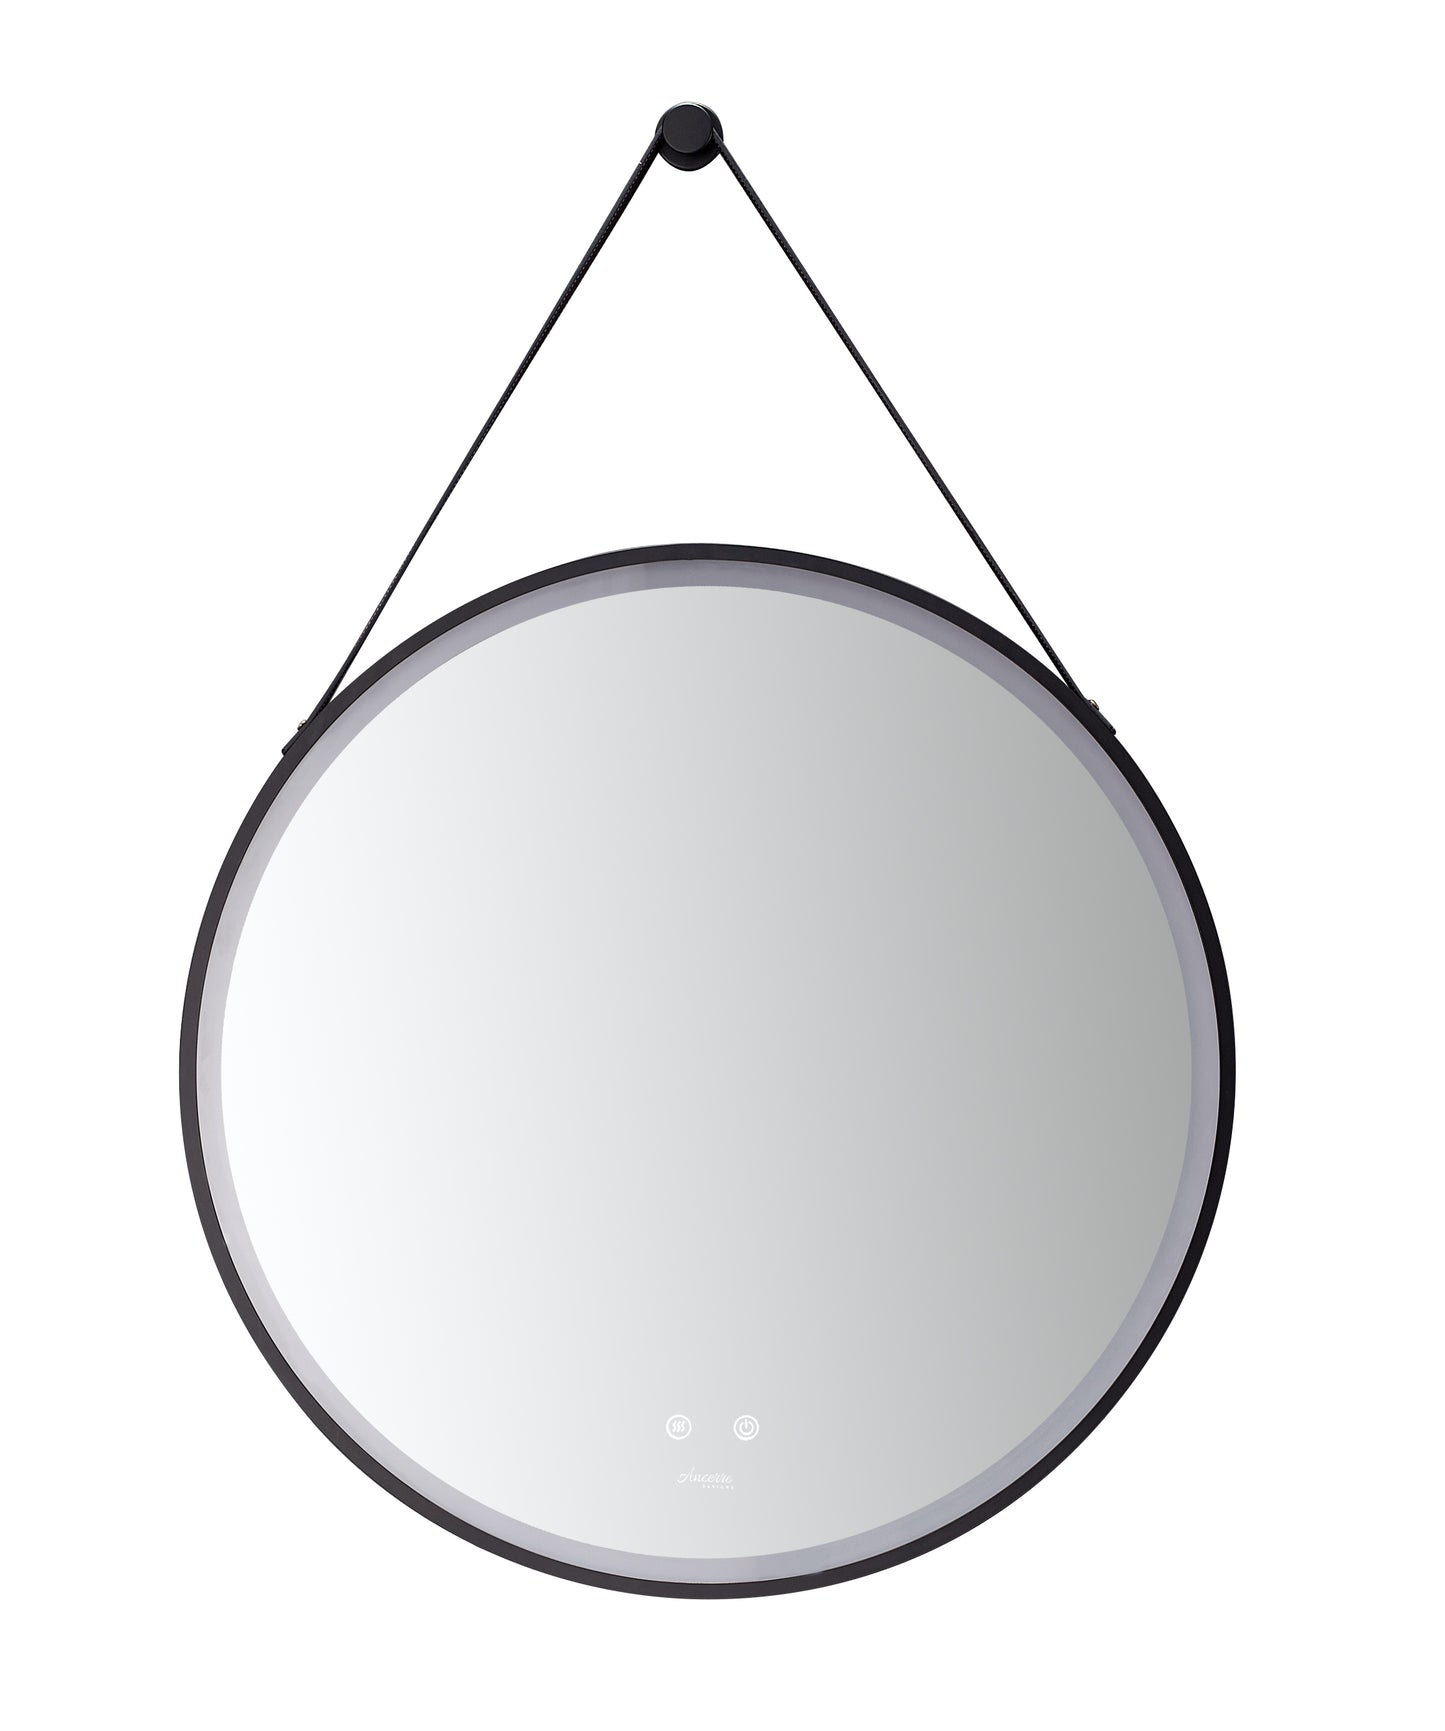 SANGLE 30 in. Round LED Black Framed Mirror with Defogger and Vegan Leather Strap